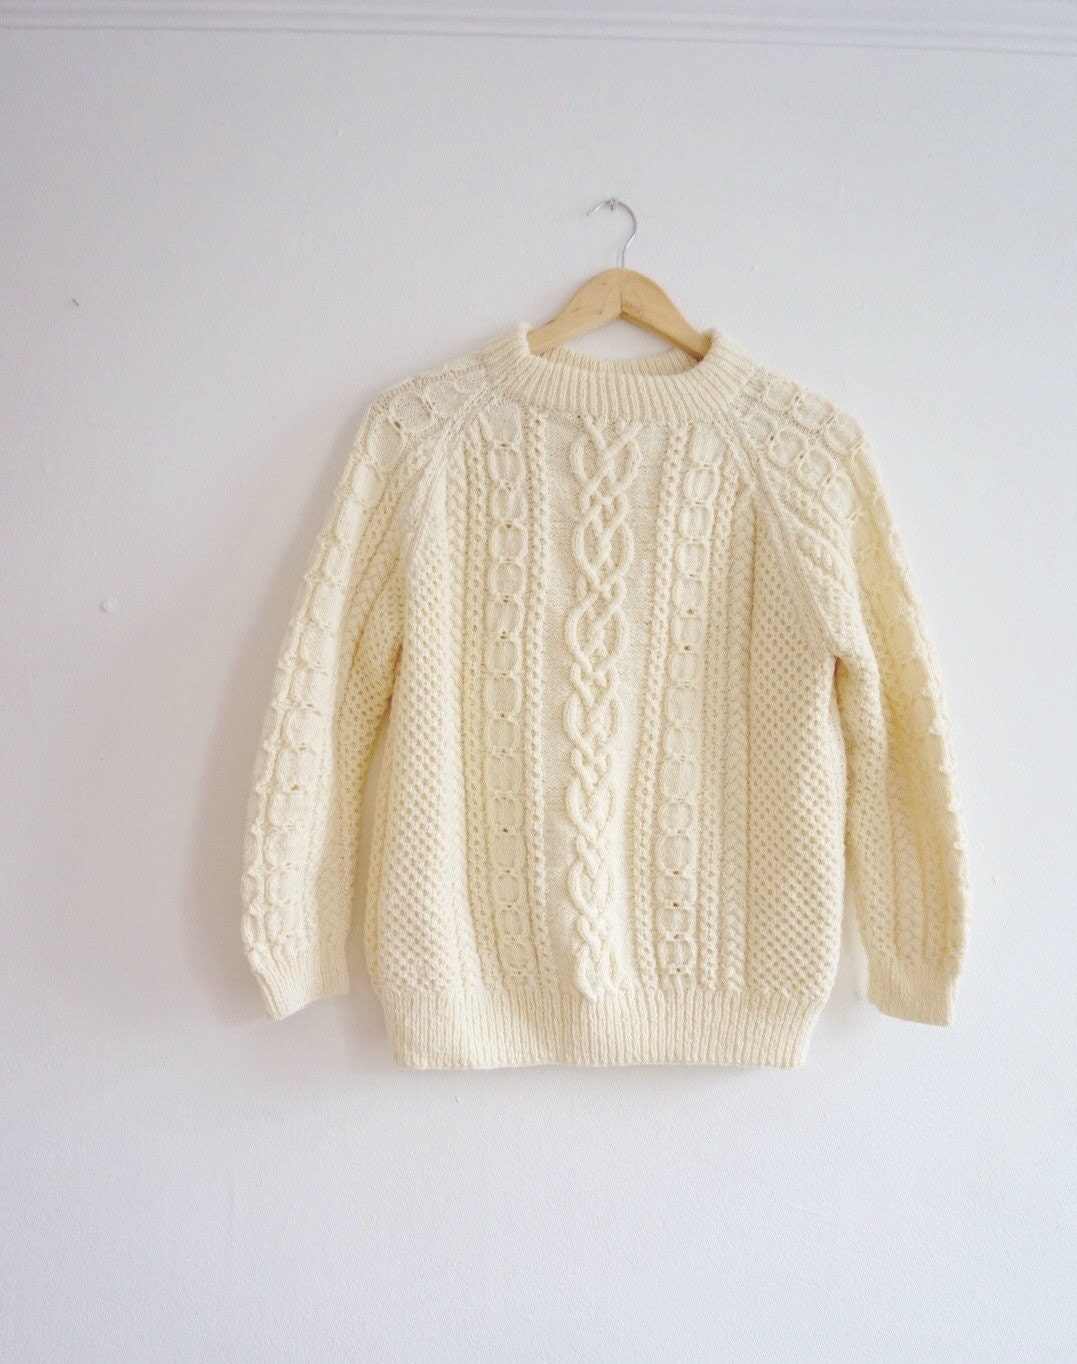 cream cable sweater // hand knitted jumper // small wool sweater ...